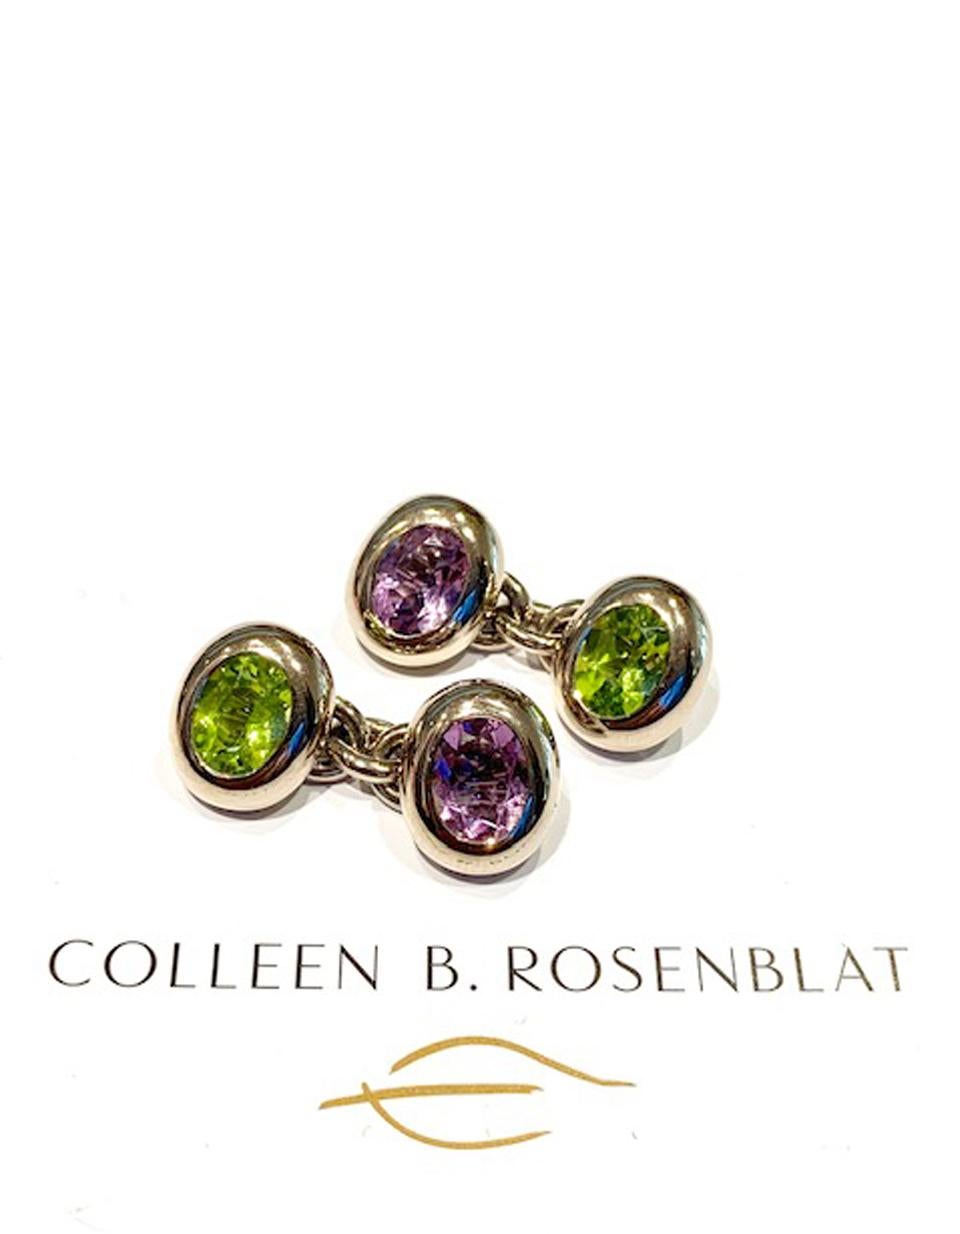 Oval Cut Cufflinks 18 Carat White Gold with Peridots and Amethysts